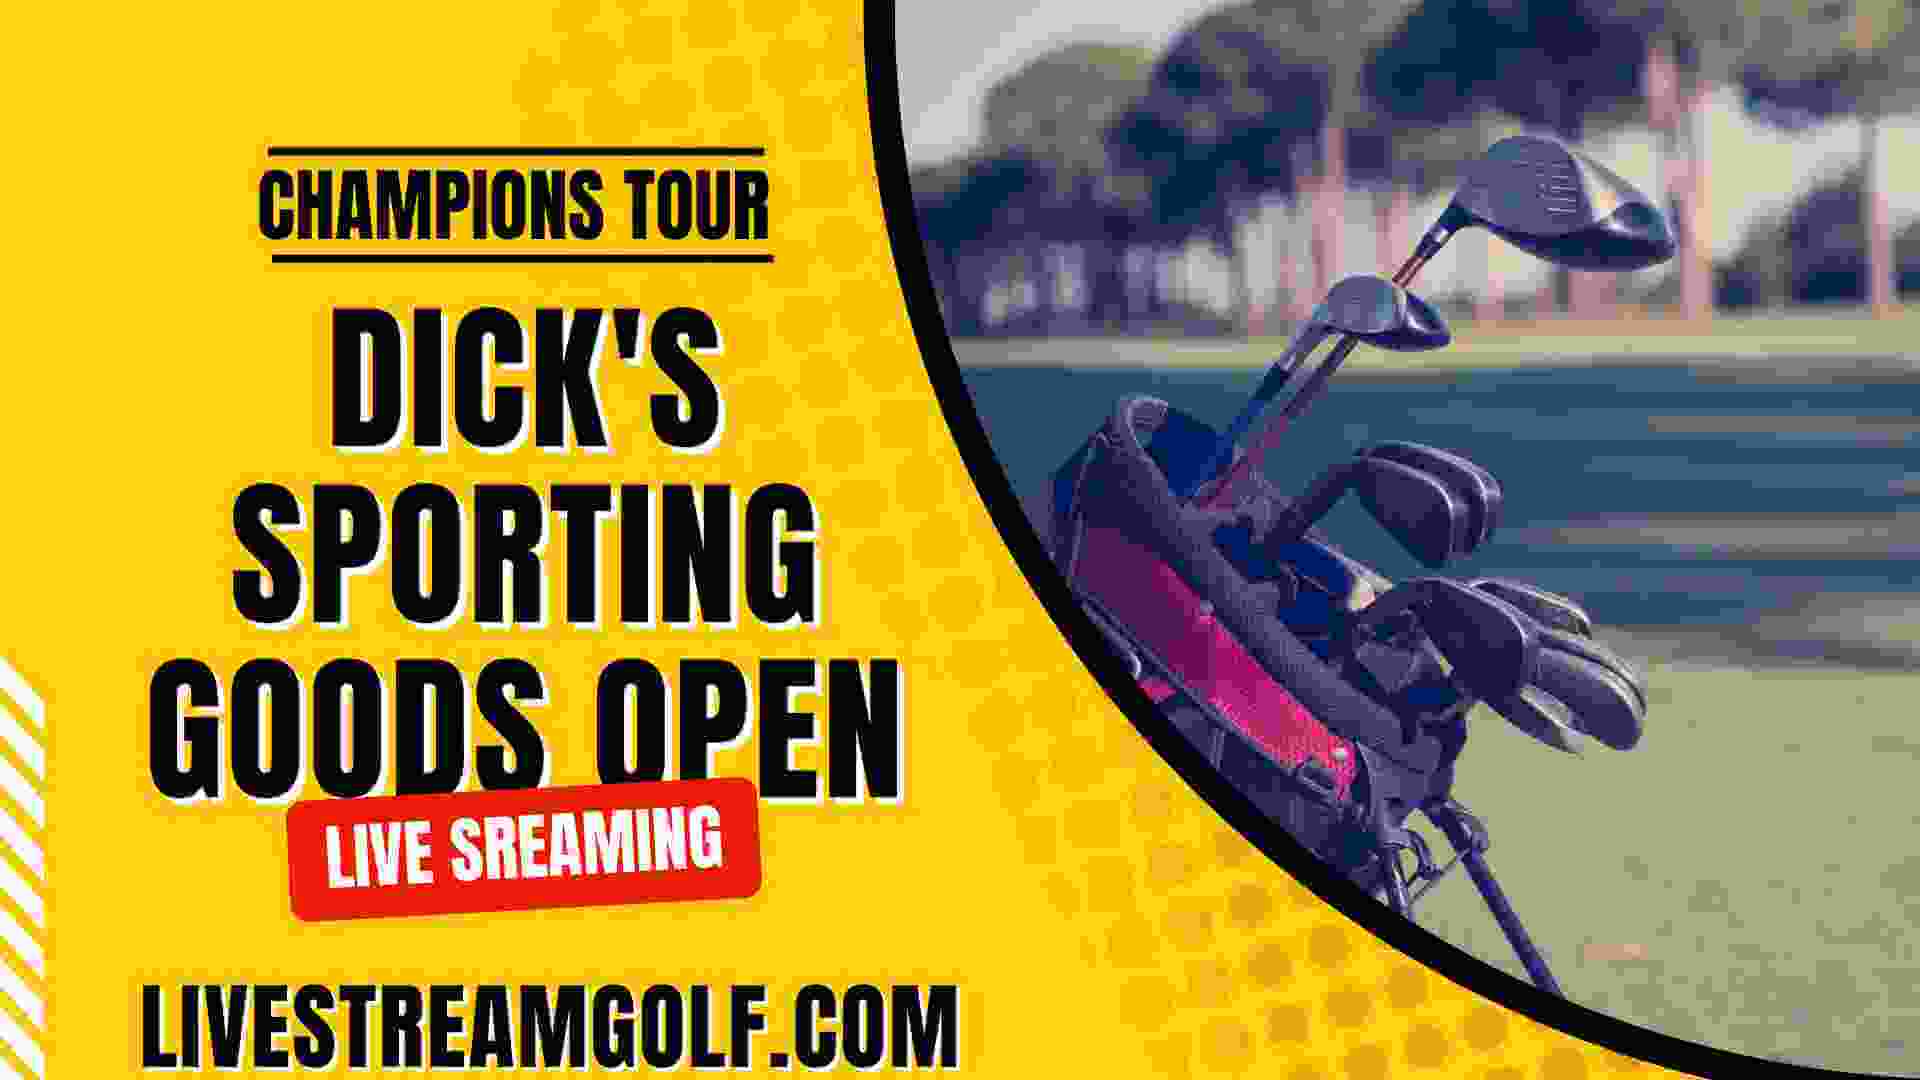 DICKS Sporting Goods Open Day 2 Live Stream: Champions Tour 2023